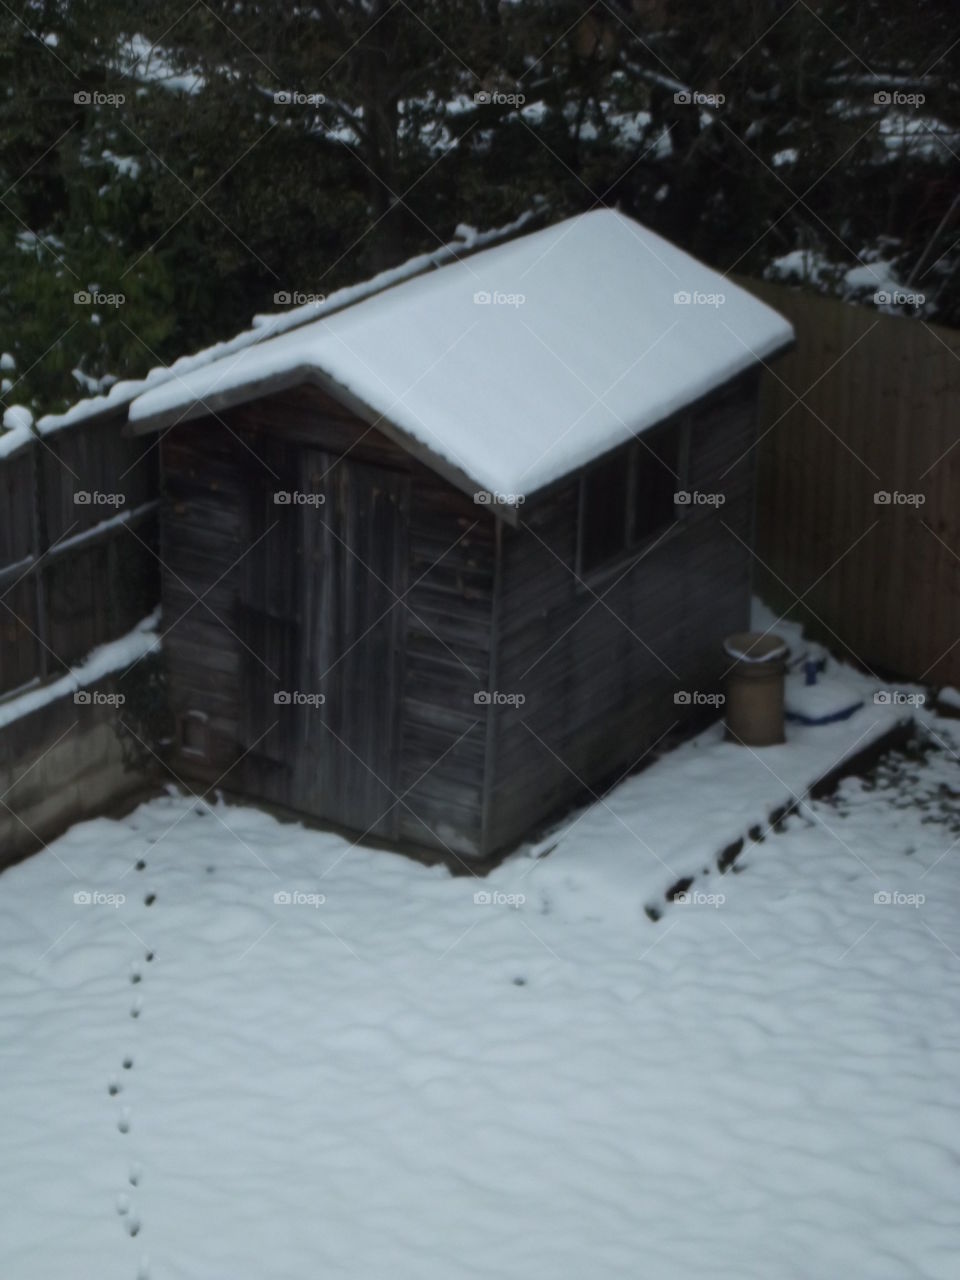 Snowy shed